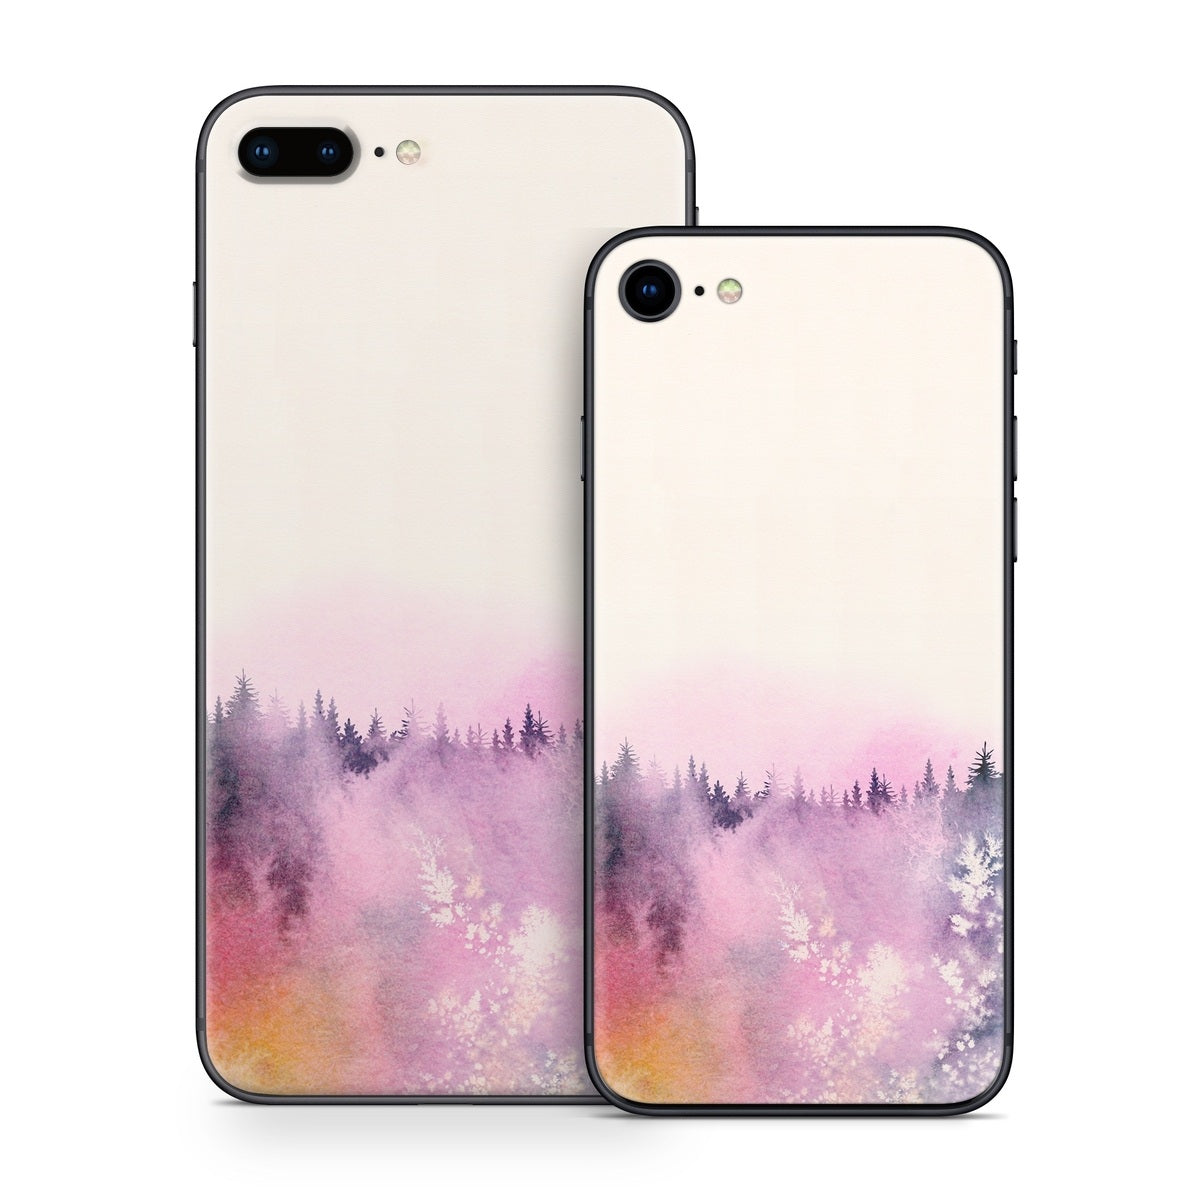 Dreaming of You - Apple iPhone 8 Skin